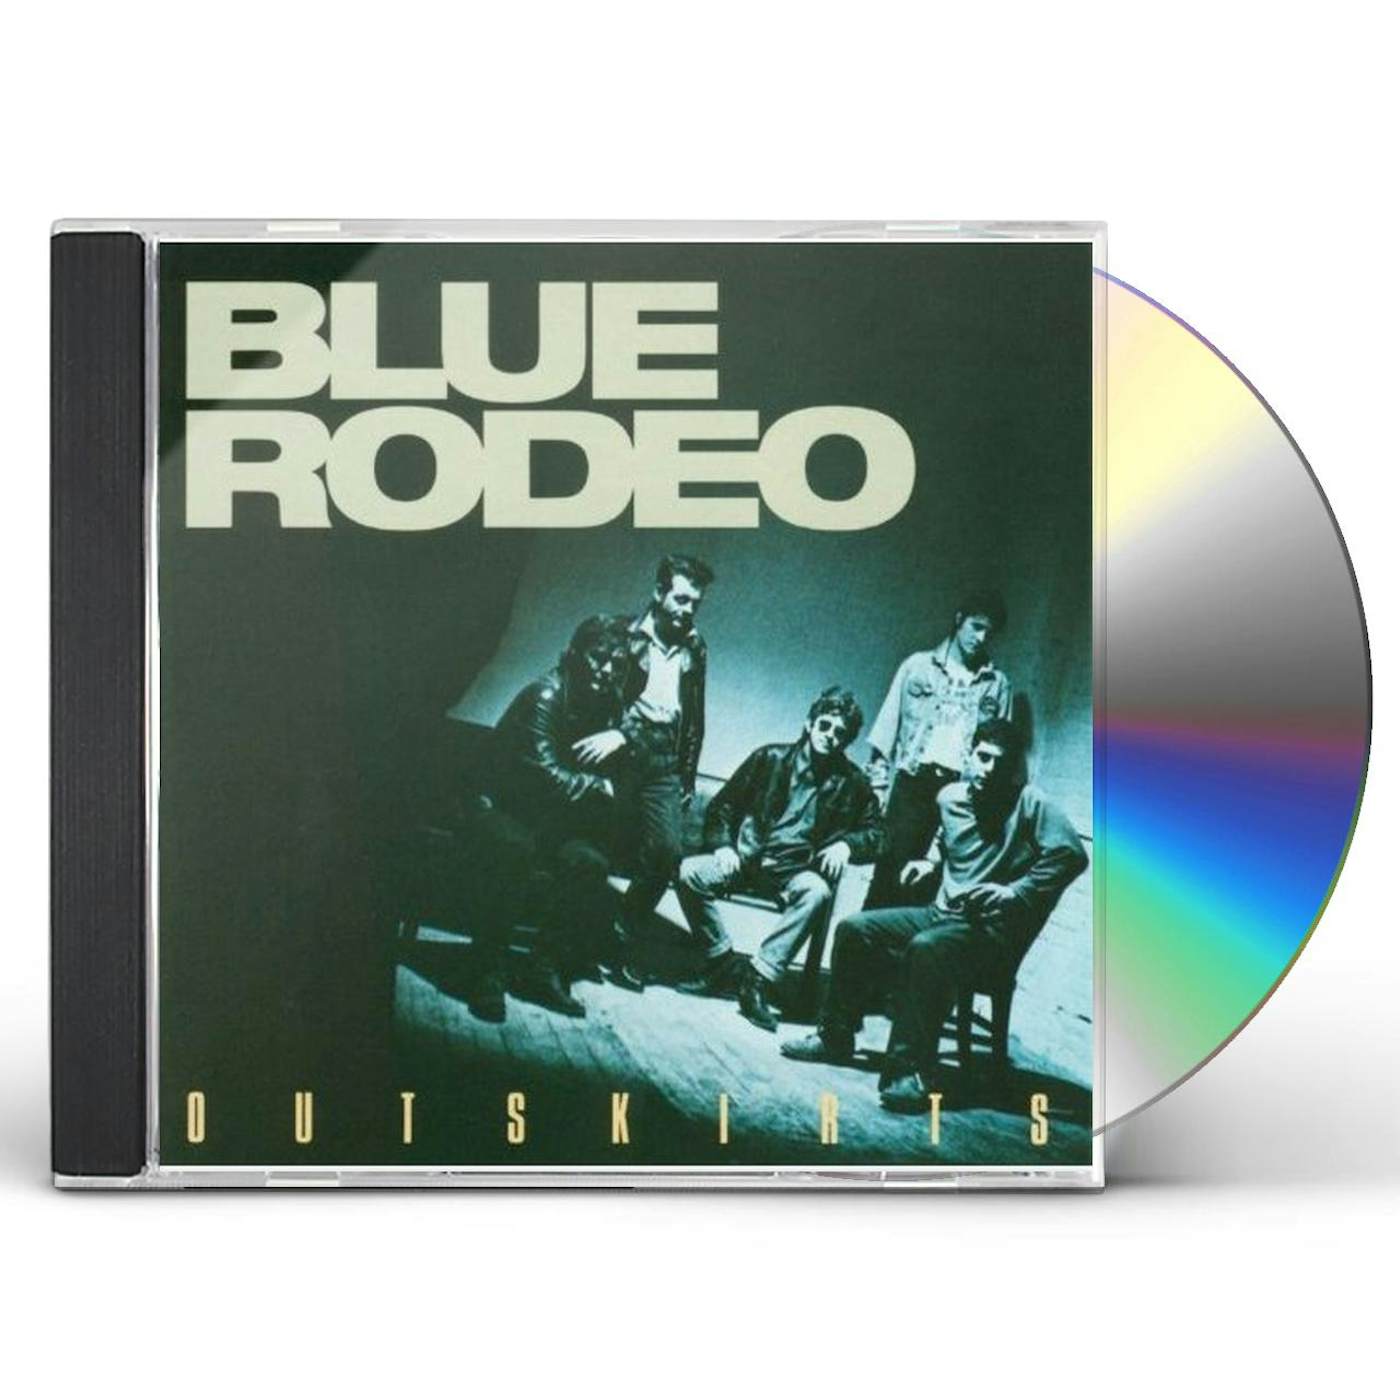 Blue Rodeo OUTSKIRTS CD